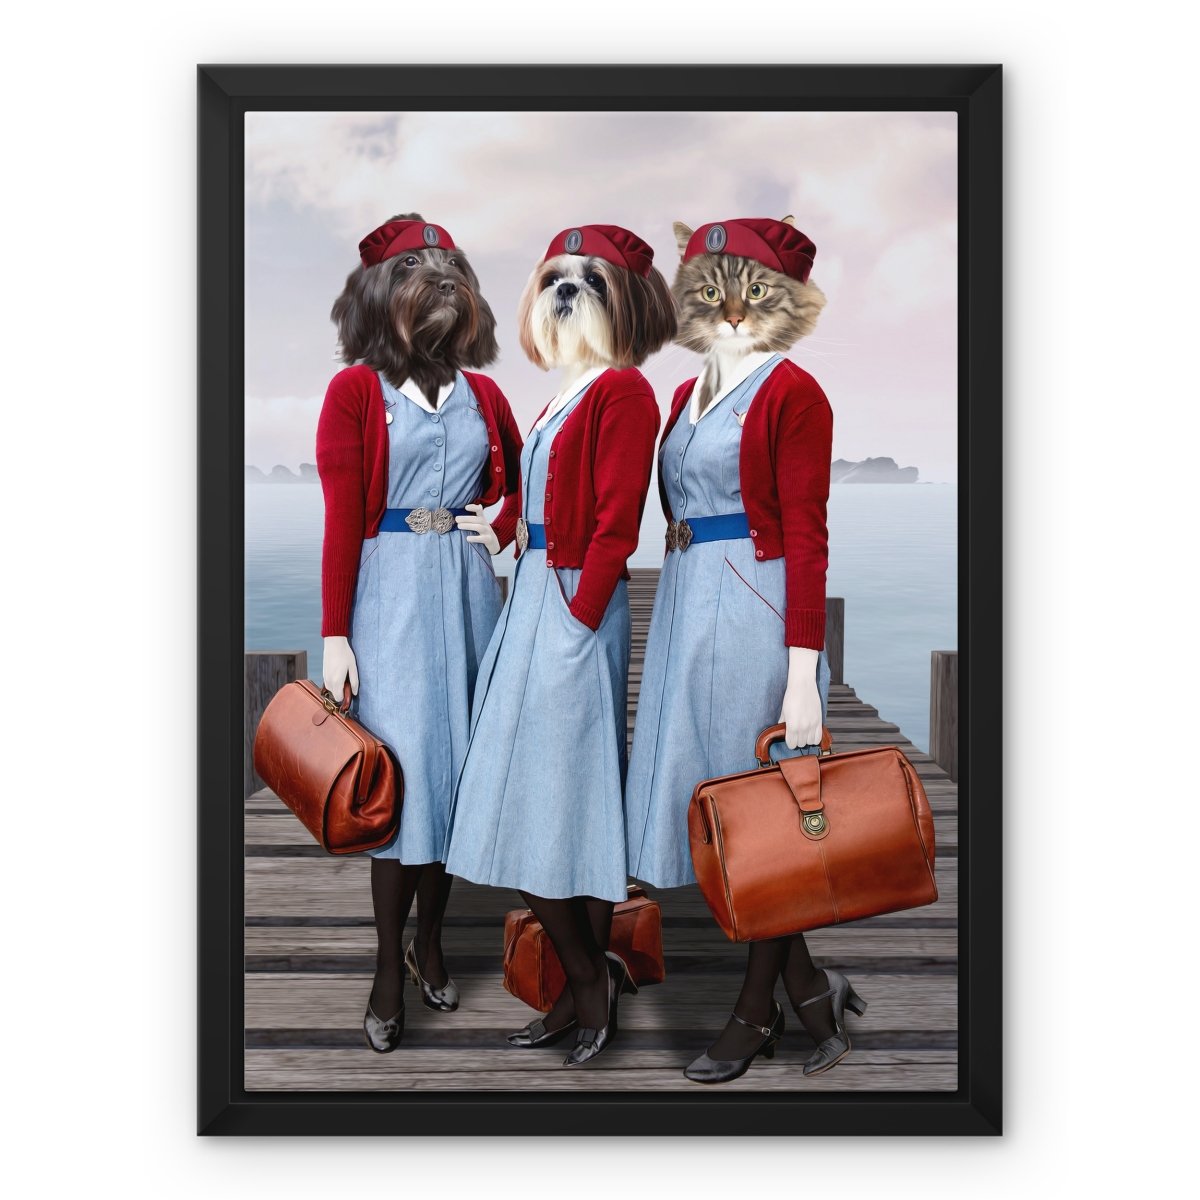 The Midwifes (Call The Midwife Inspired): Custom Pet Canvas - Paw & Glory - #pet portraits# - #dog portraits# - #pet portraits uk#paw and glory, pet portraits canvas,canvas dog carrier, my pet canvas , pet custom canvas, pet on canvas uk, pet canvas portrait